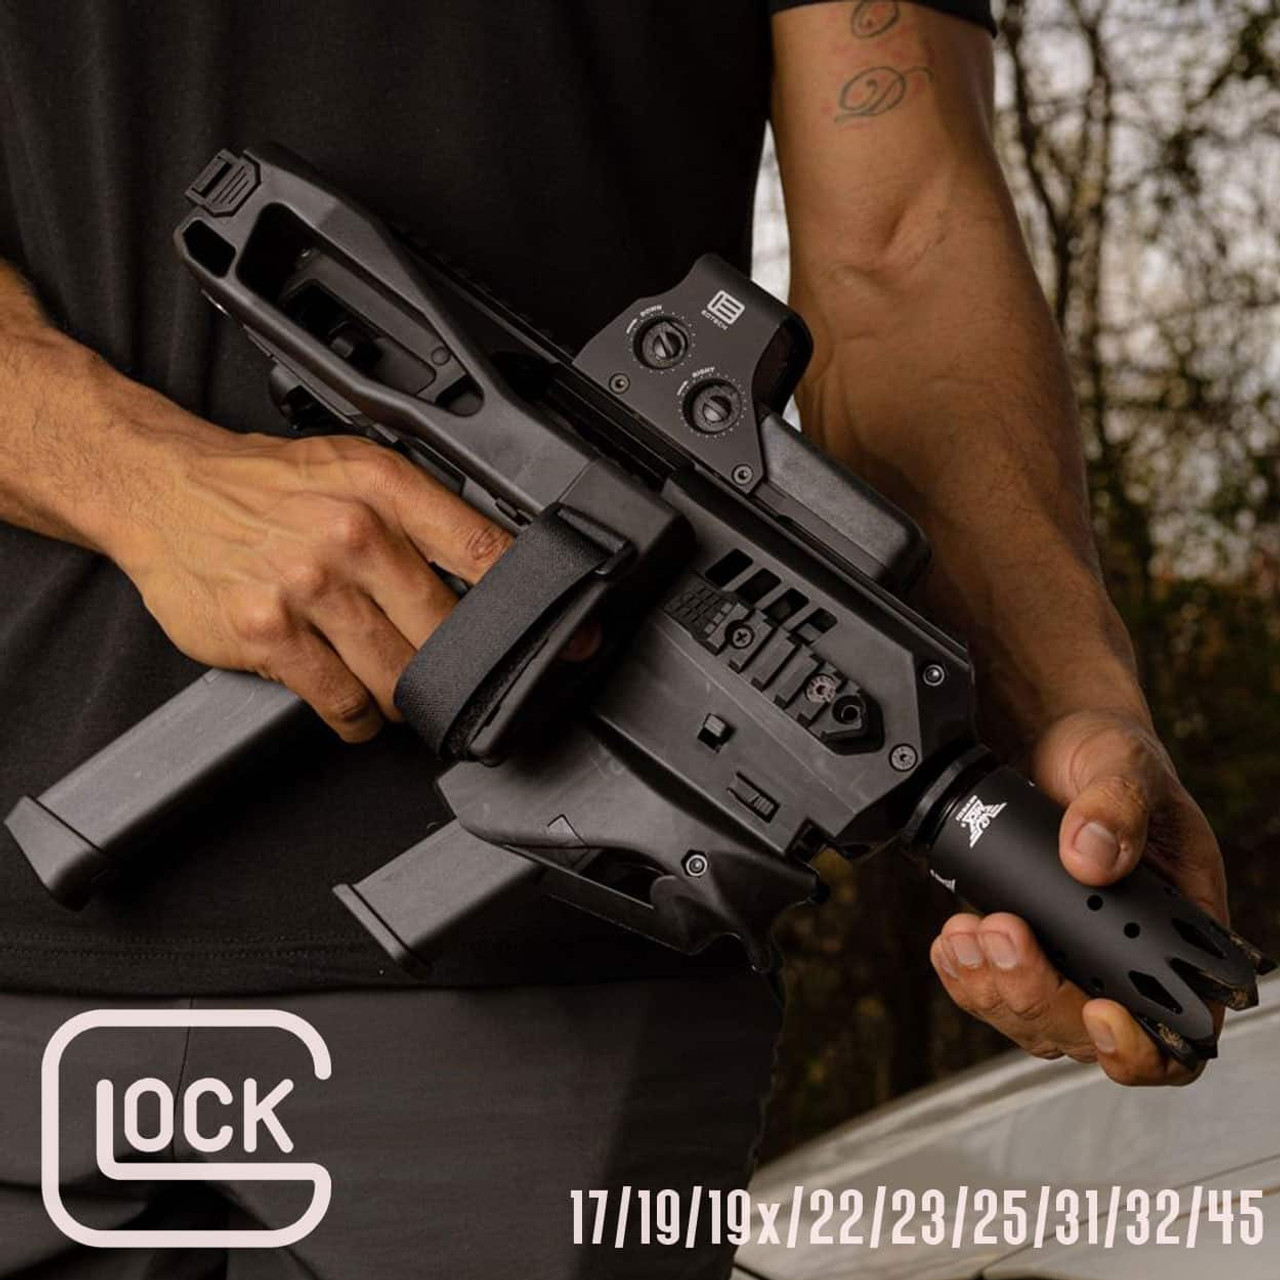 MCK GEN2 | MICRO CONVERSION KIT Glock  17, 19, 19X, 22, 23, 31, 32, G45  CCA USA
*Accessories not included